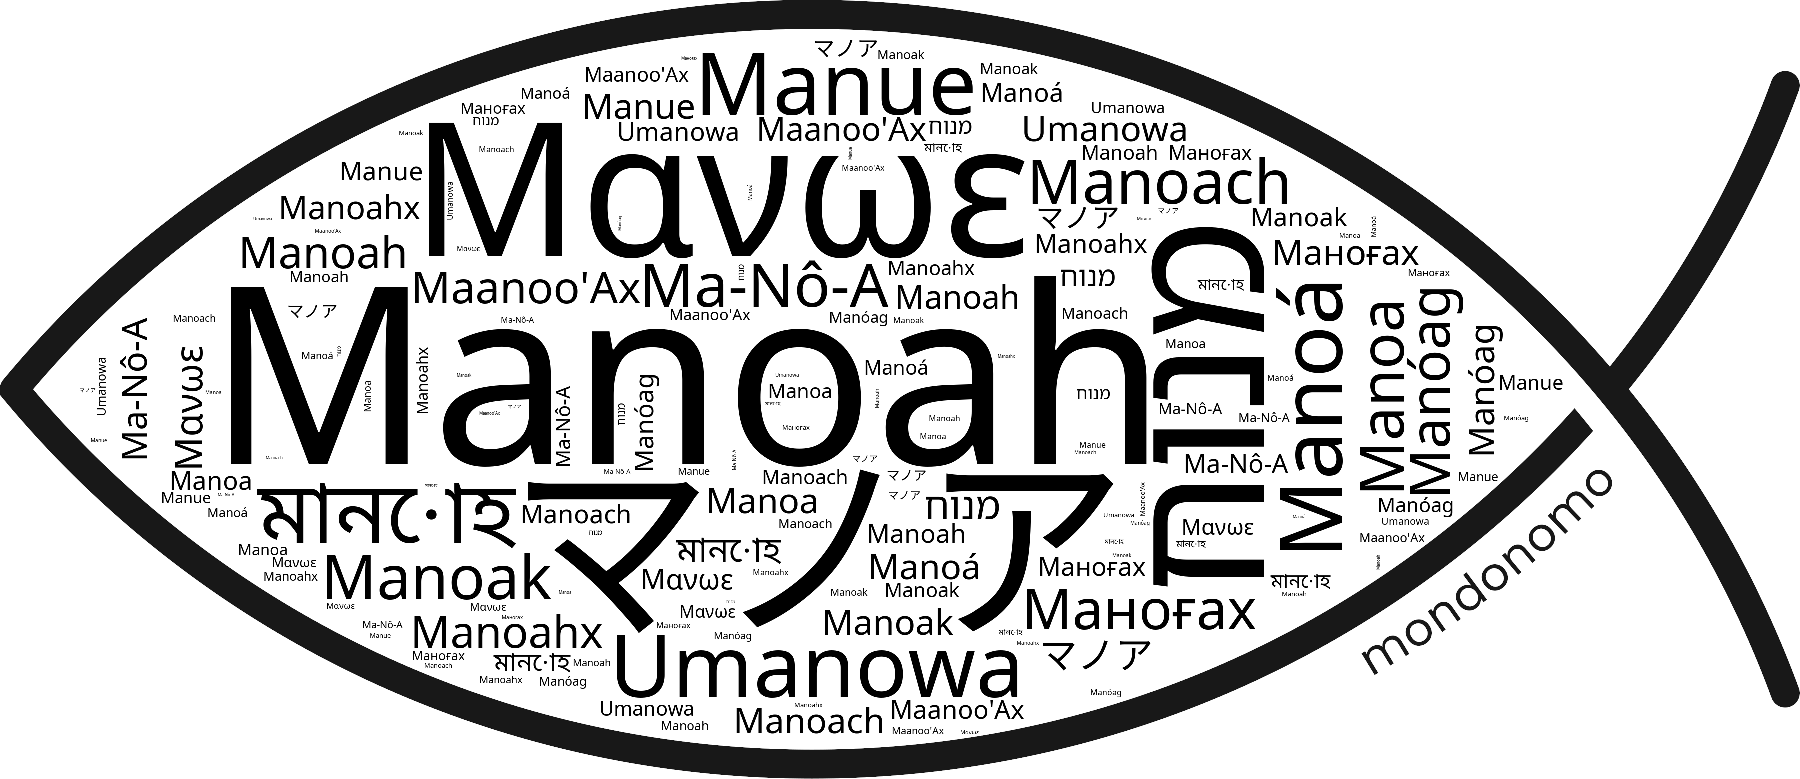 Name Manoah in the world's Bibles